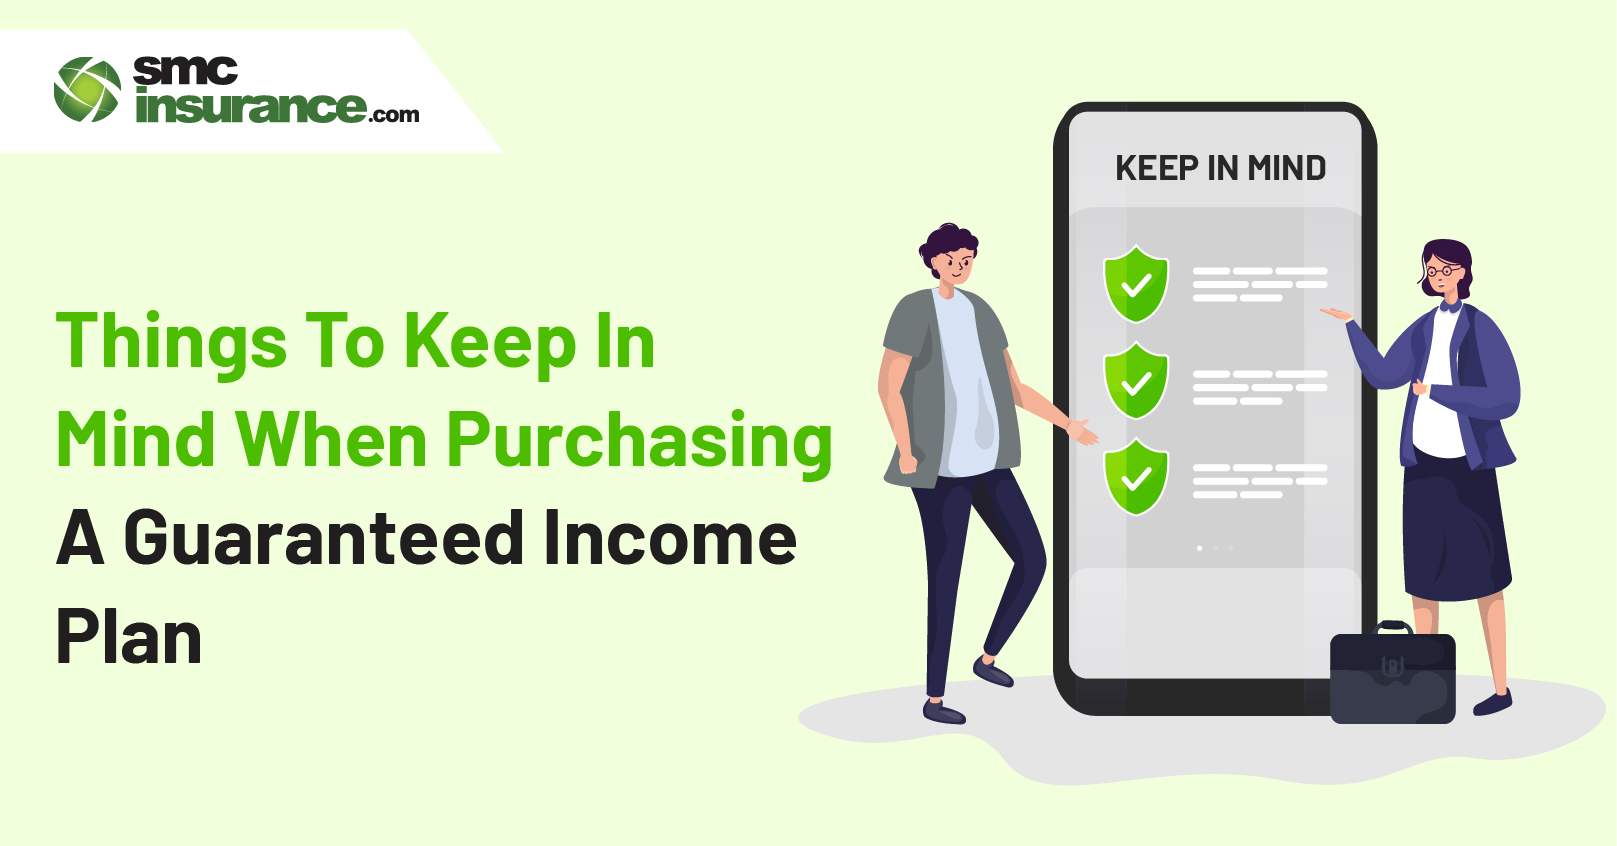 Things To Keep In Mind When Purchasing A Guaranteed Income Plan